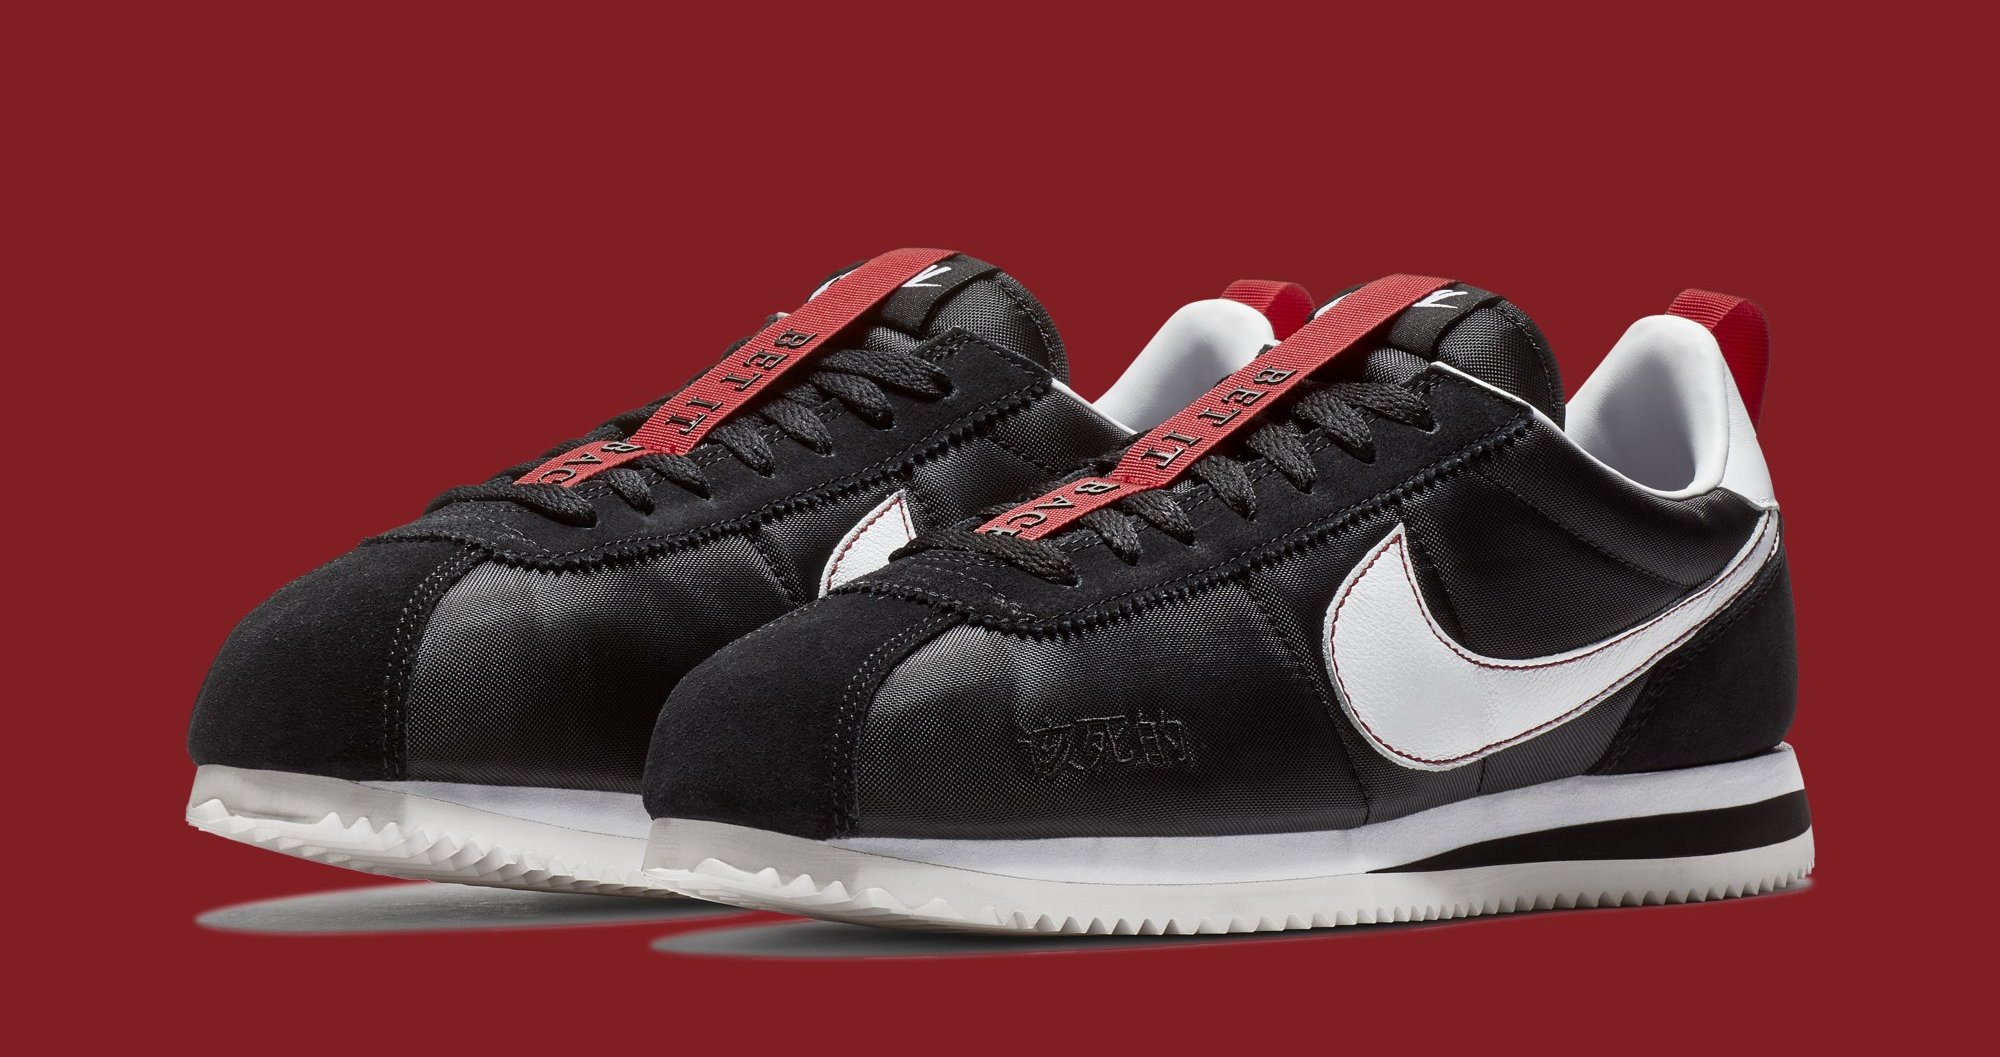 Kendrick Lamar x Cortez Kenny 3 SNKRS Release | Sole Collector